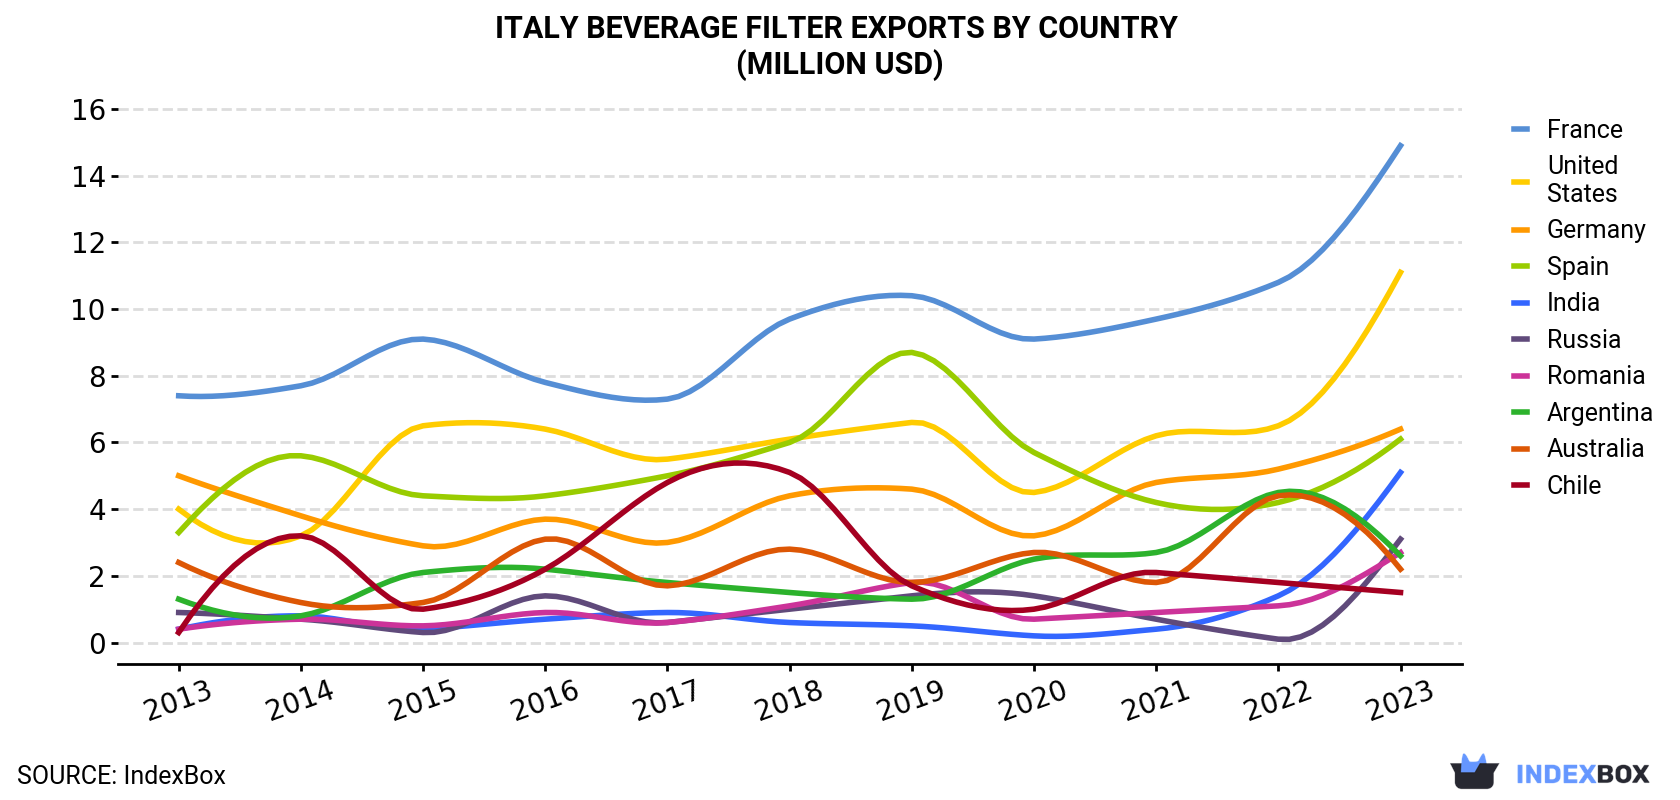 Italy Beverage Filter Exports By Country (Million USD)